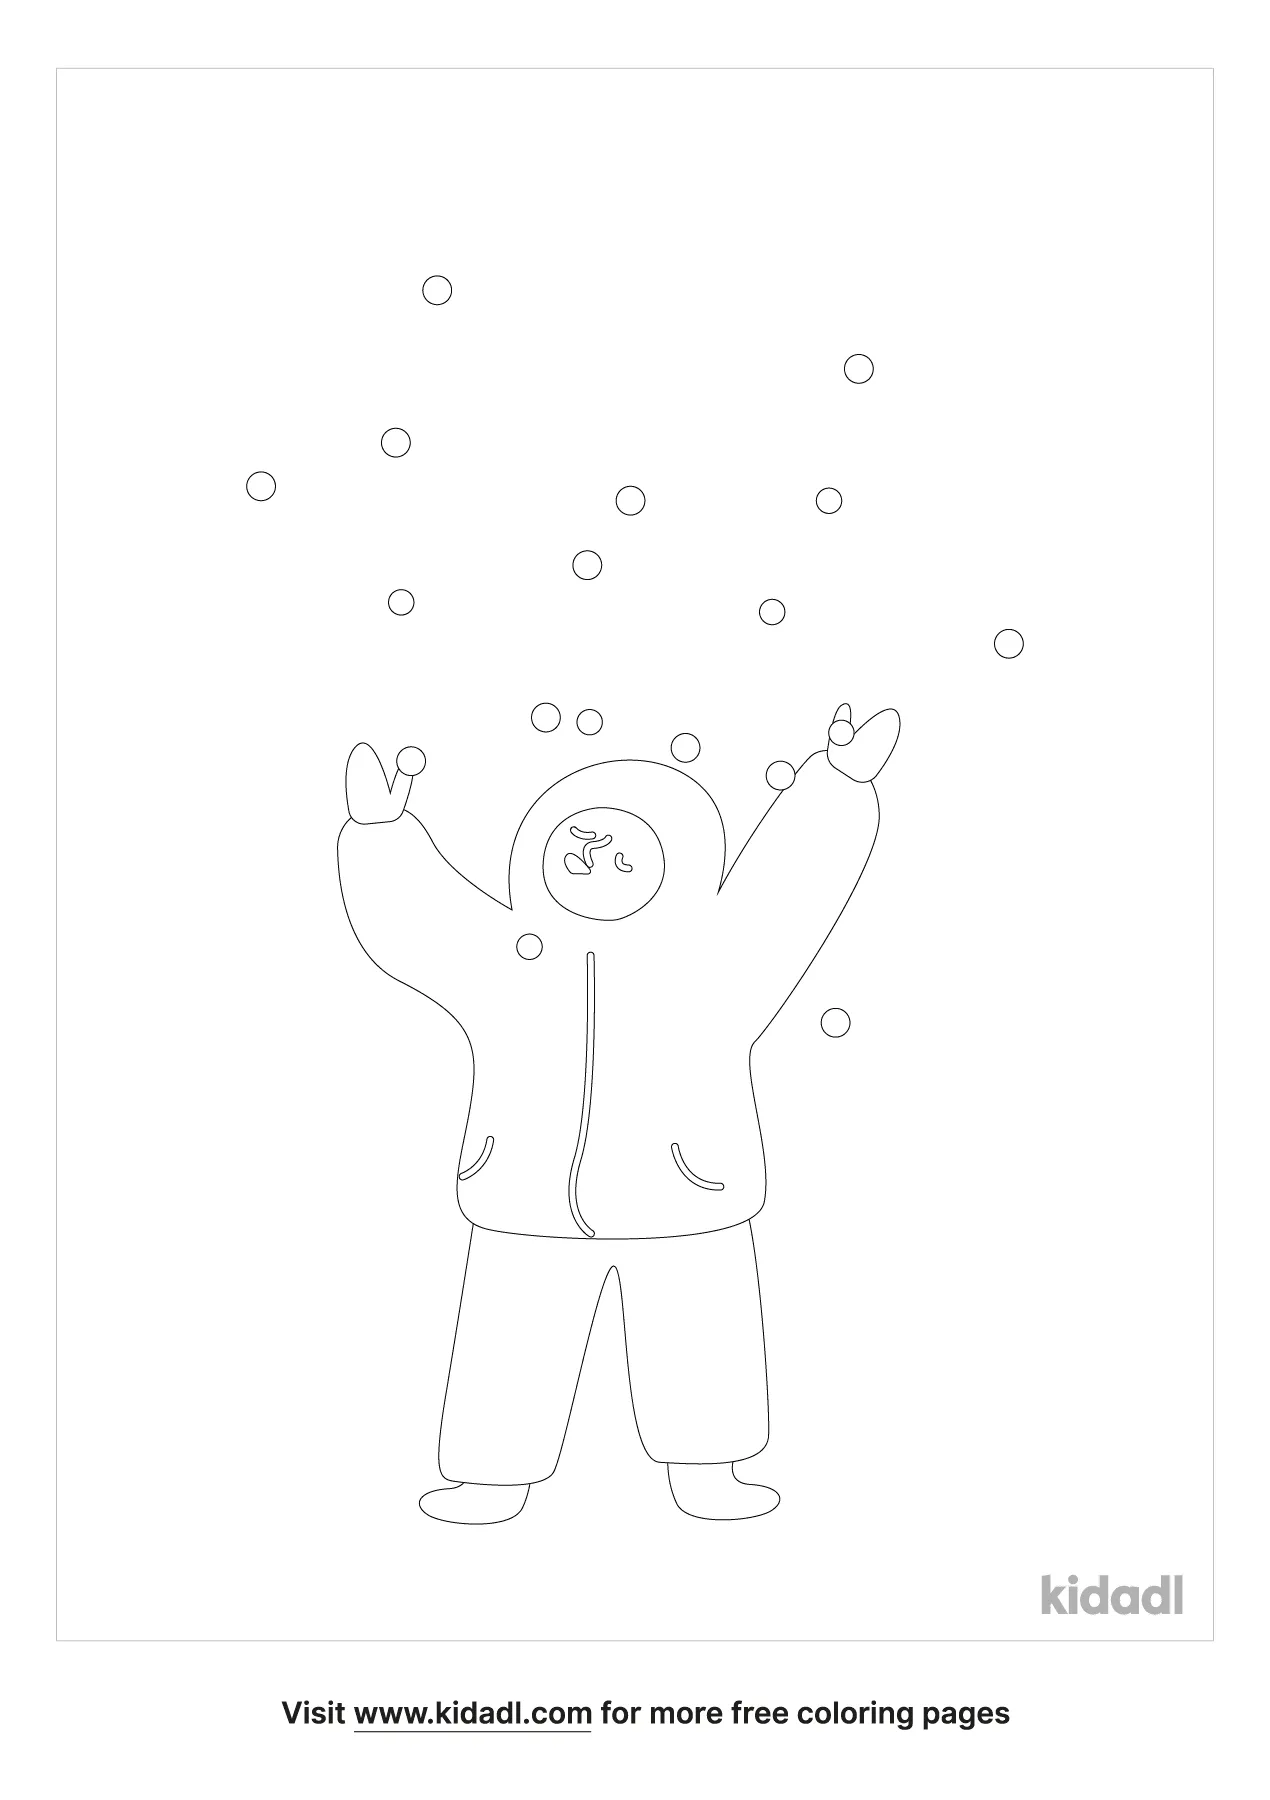 Children Eating Snow Coloring Page